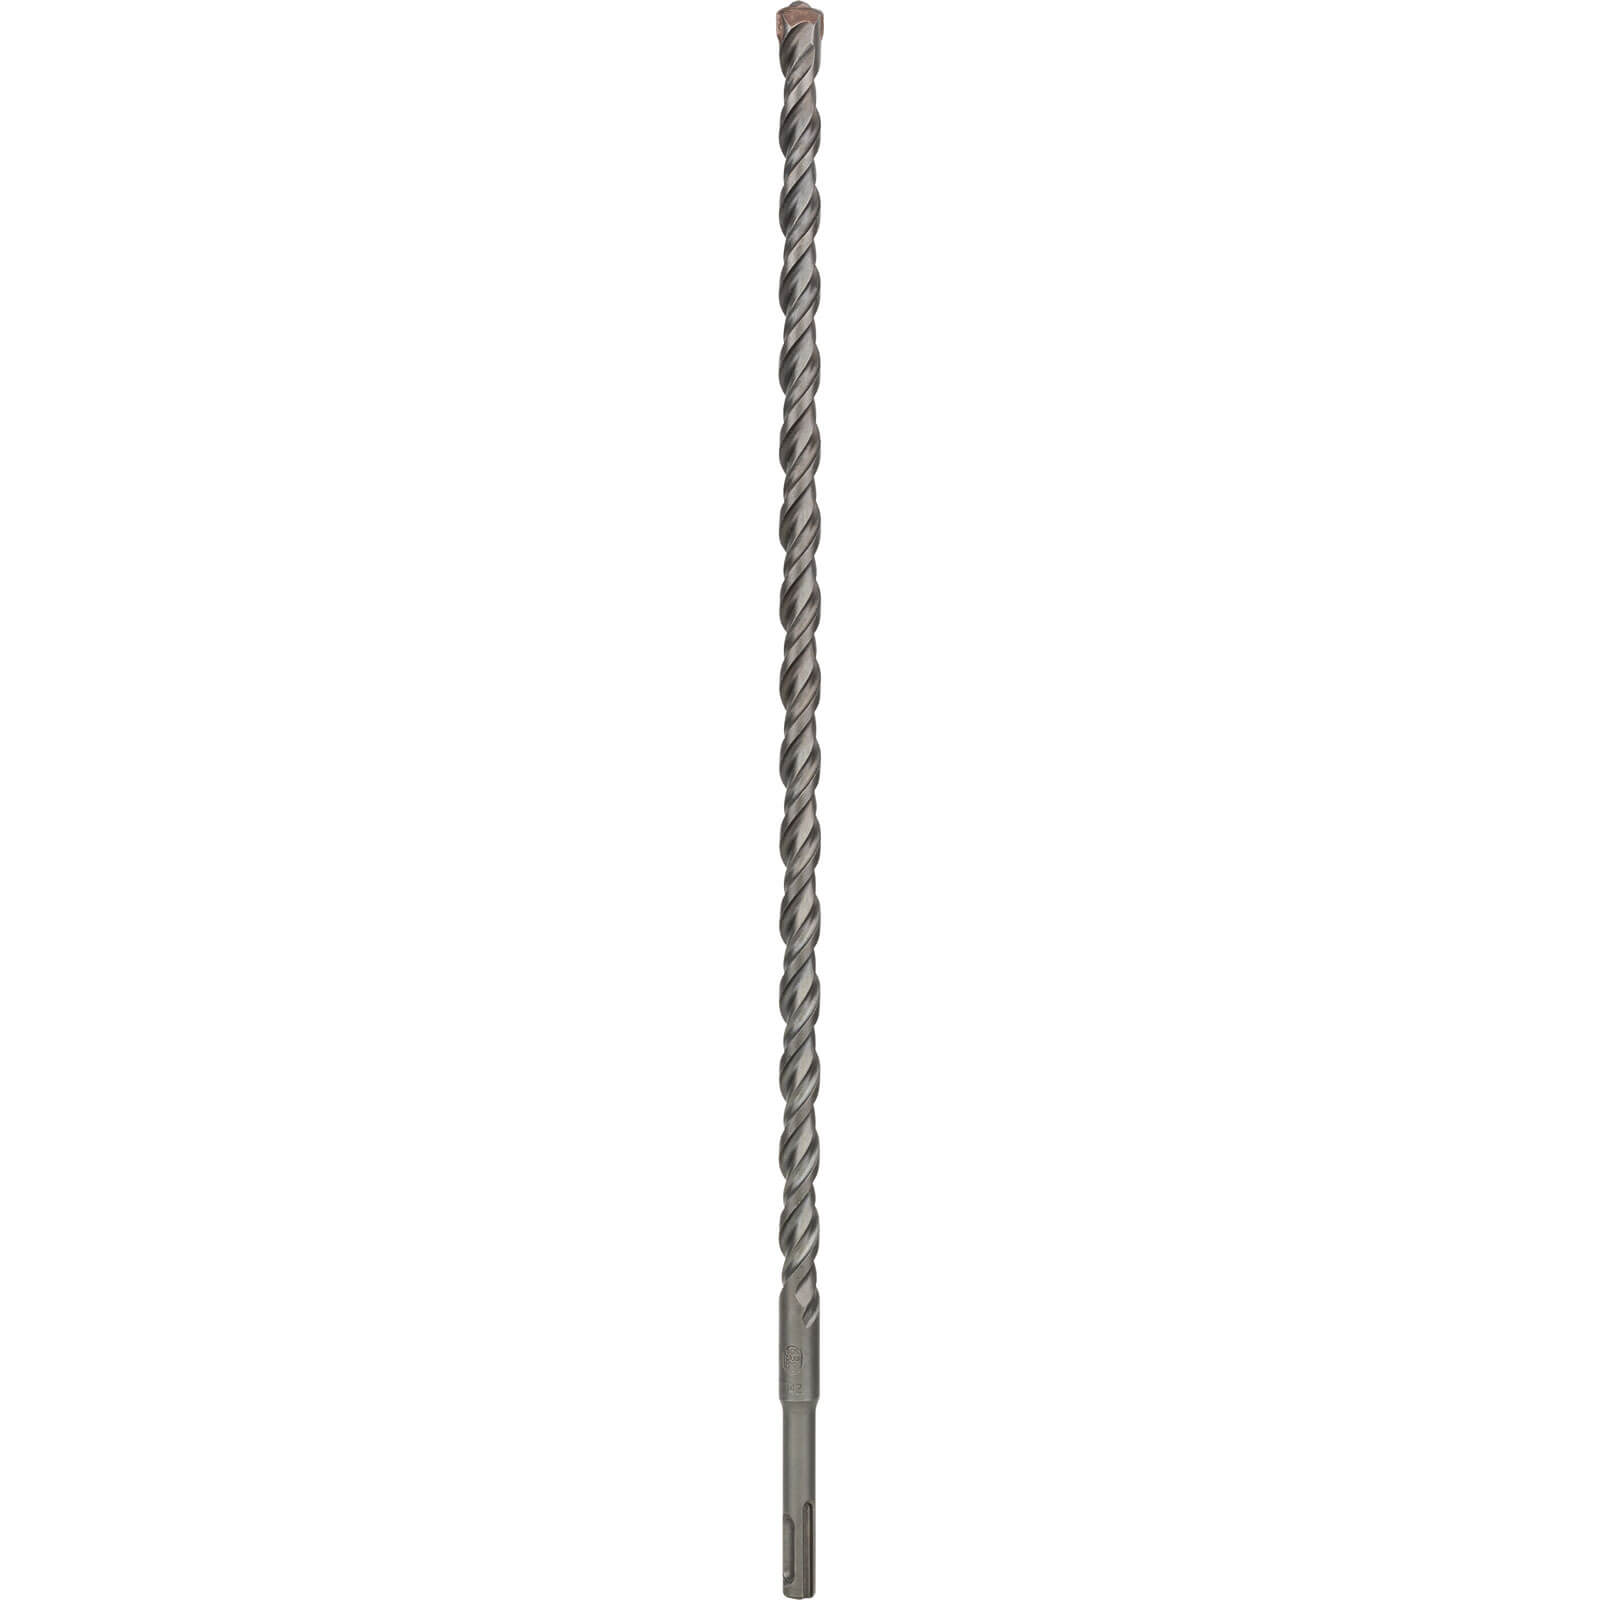 Image of Bosch Series 3 SDS Plus Masonry Drill Bit 14mm 460mm Pack of 1